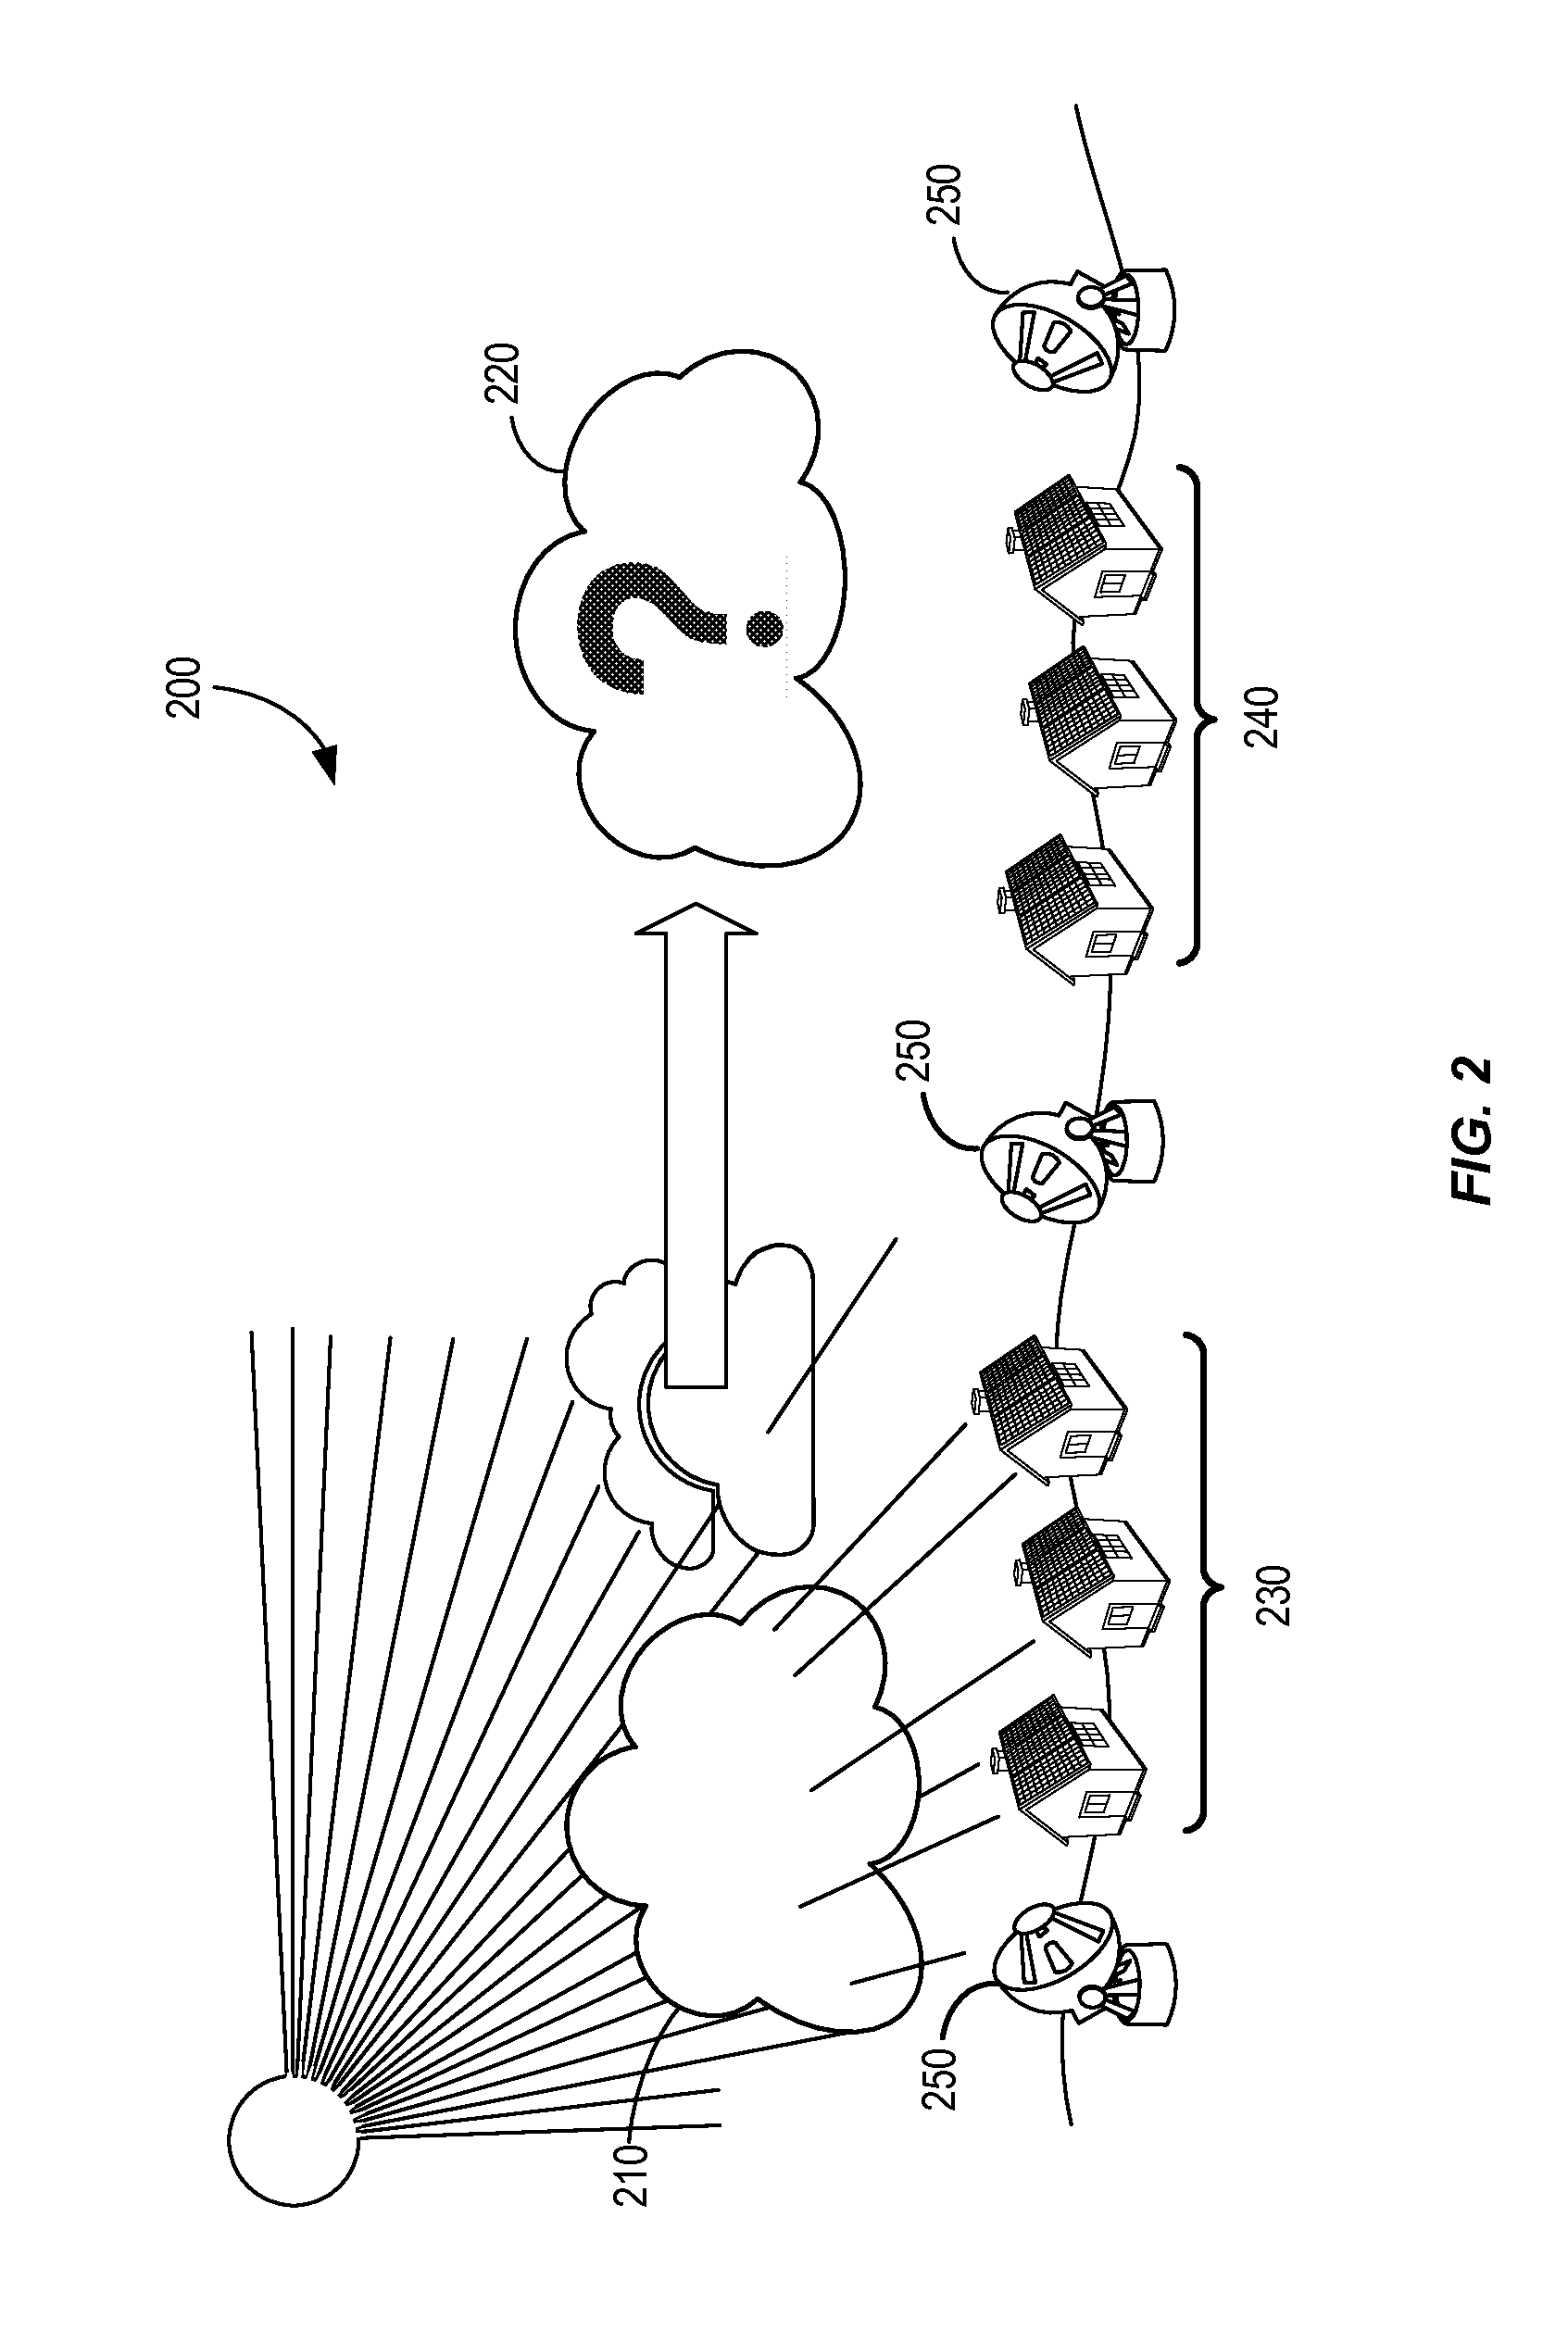 Charging profiles for a storage device in an energy generation system